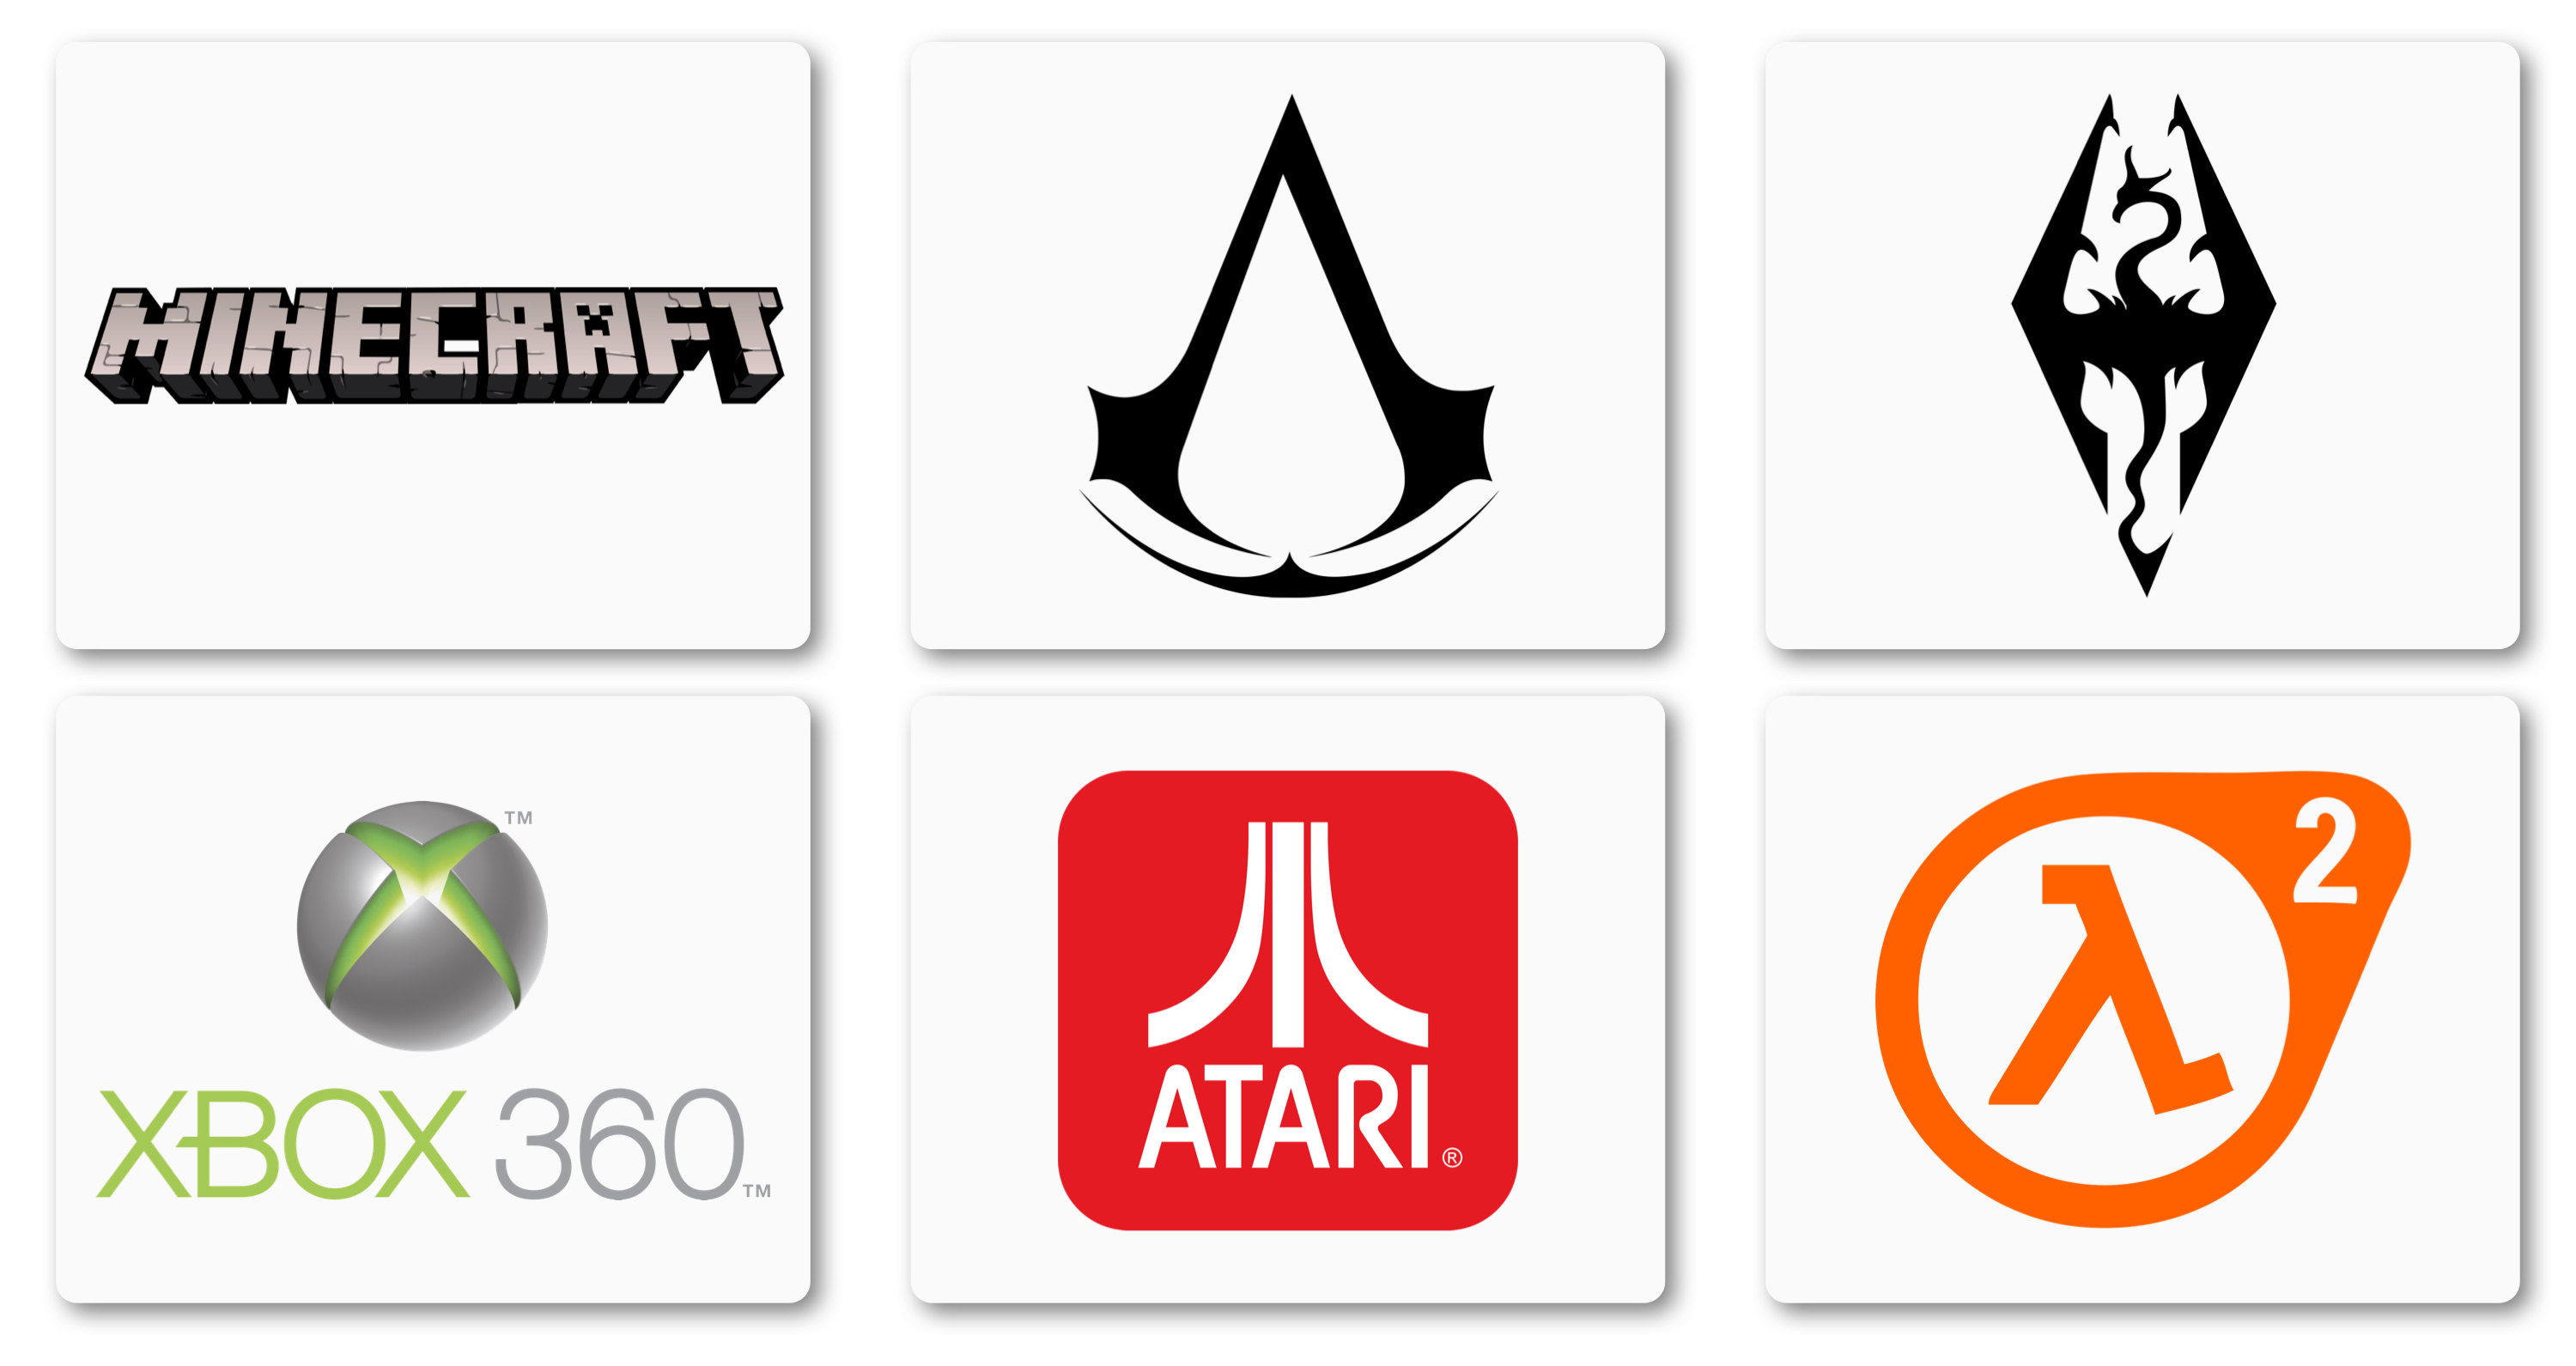 Some of the most iconic gaming logos including Minecraft, Assassin's Creed, Skyrim, Xbox 360, Atari, Half Life 2